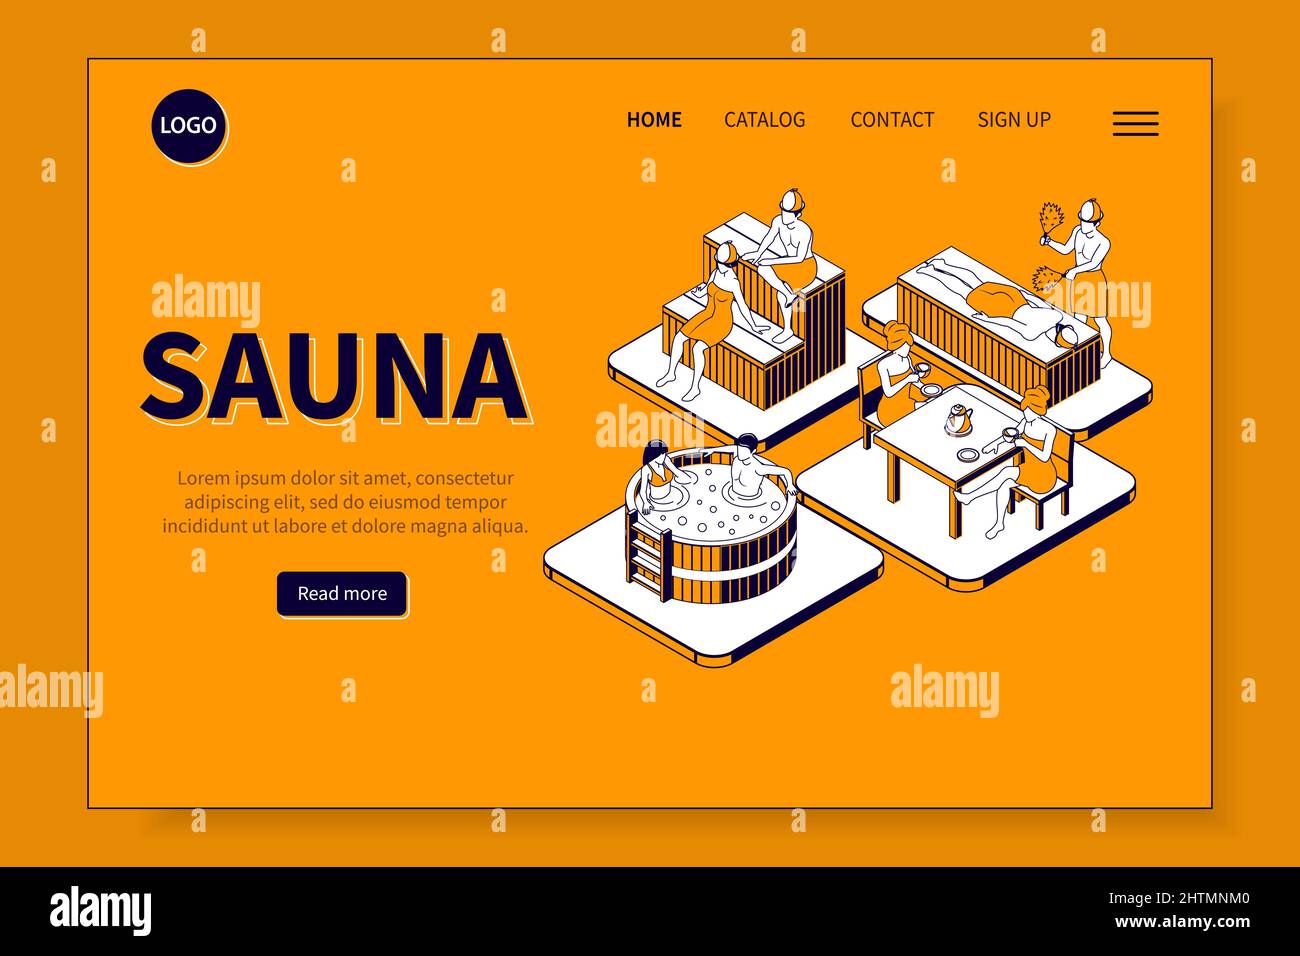 Sauna isometric landing page for web site with sign up catalog contact headings vector illustration Stock Vector